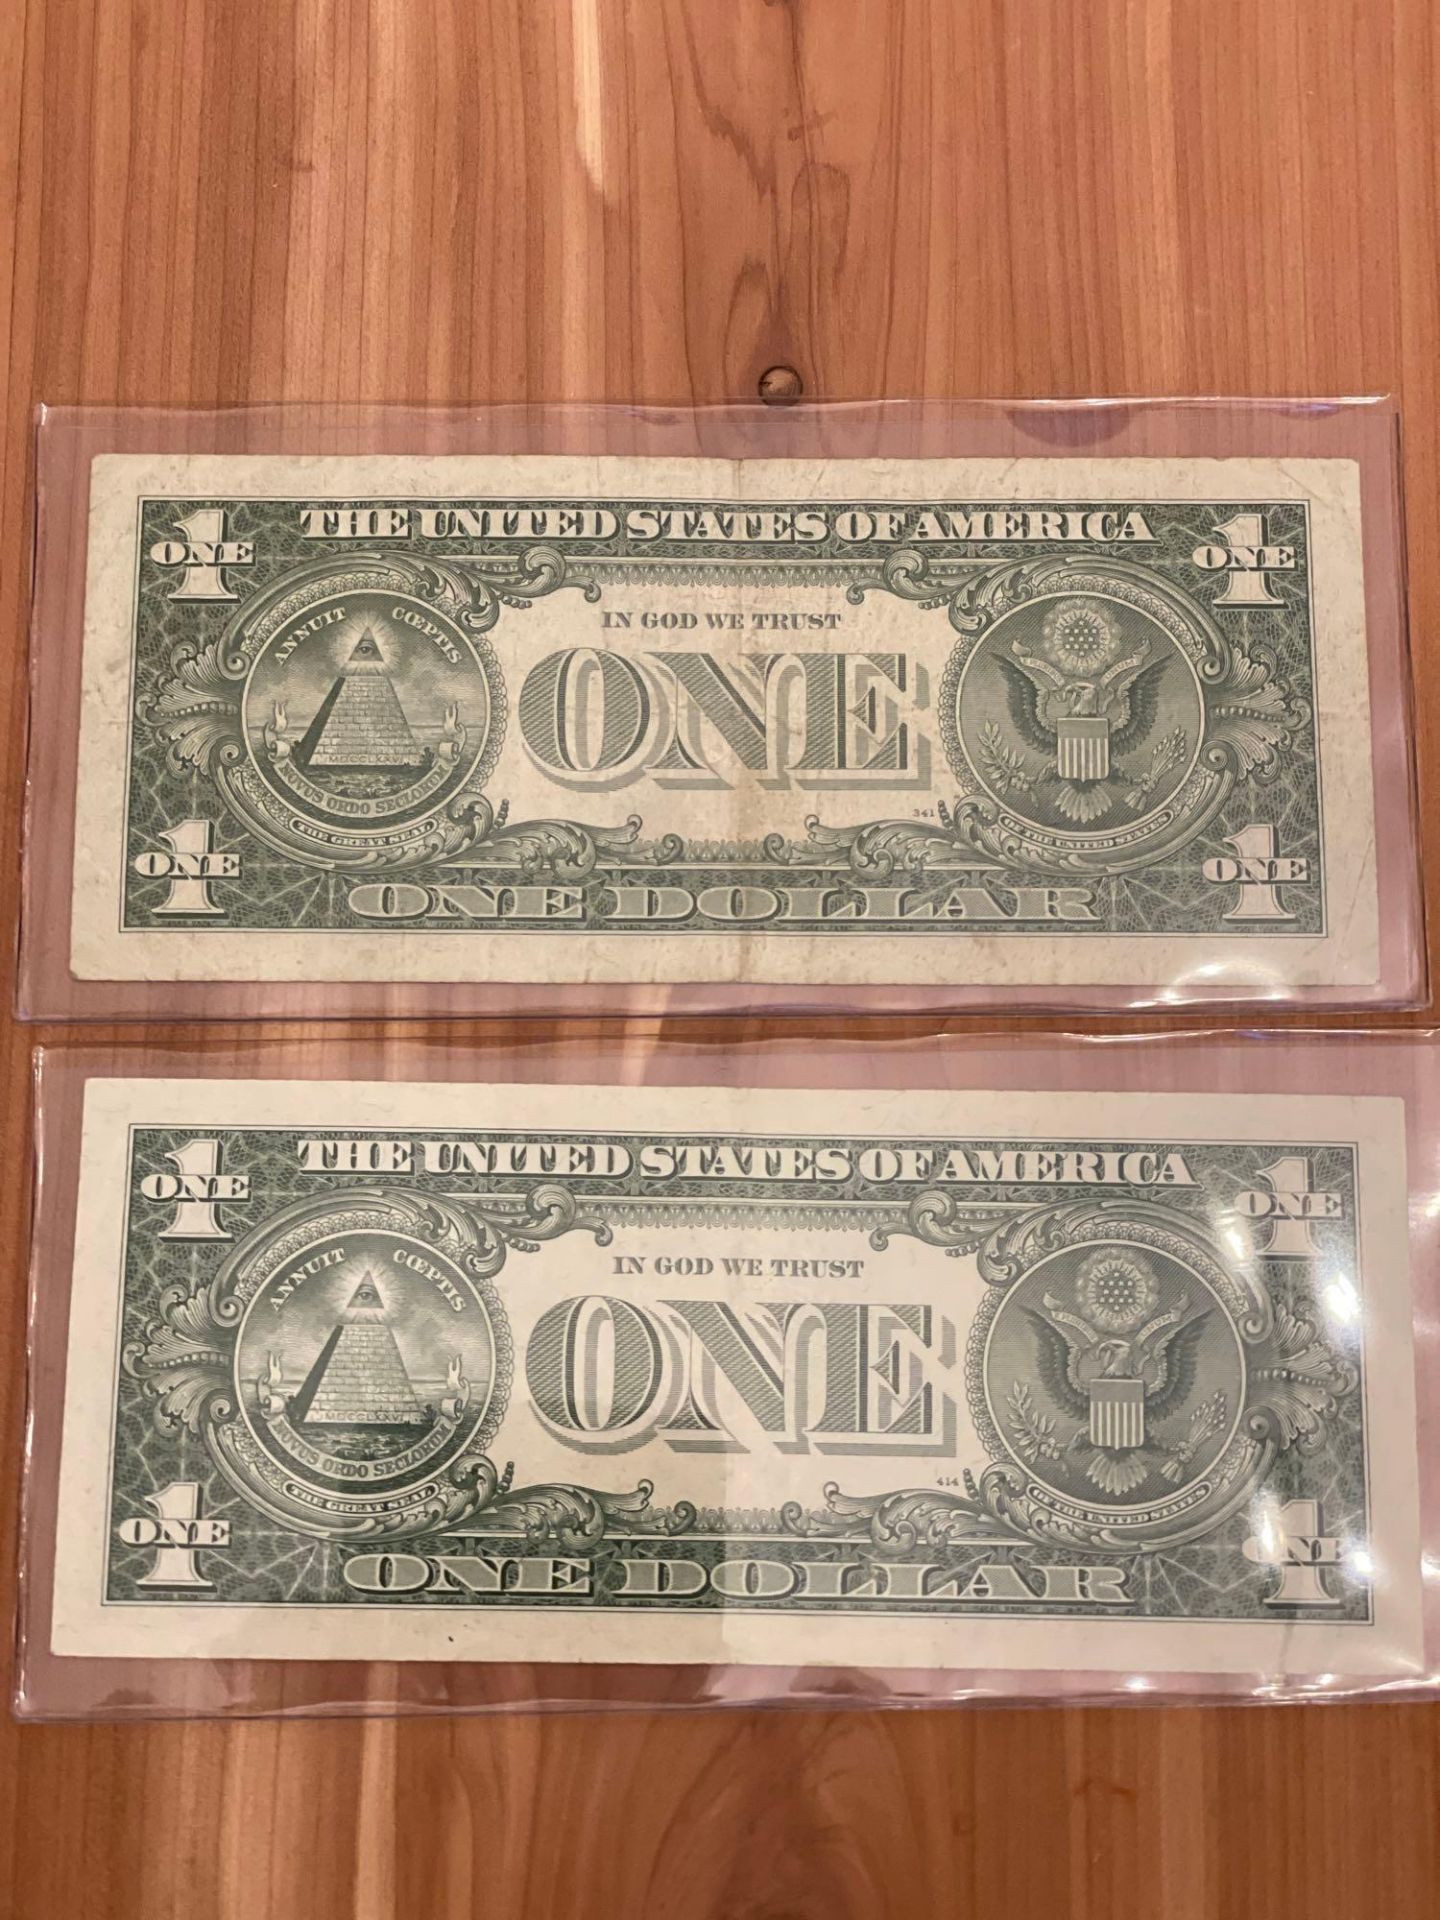 (2) 1957 $1 Silver Certificate Star Notes - Image 3 of 3